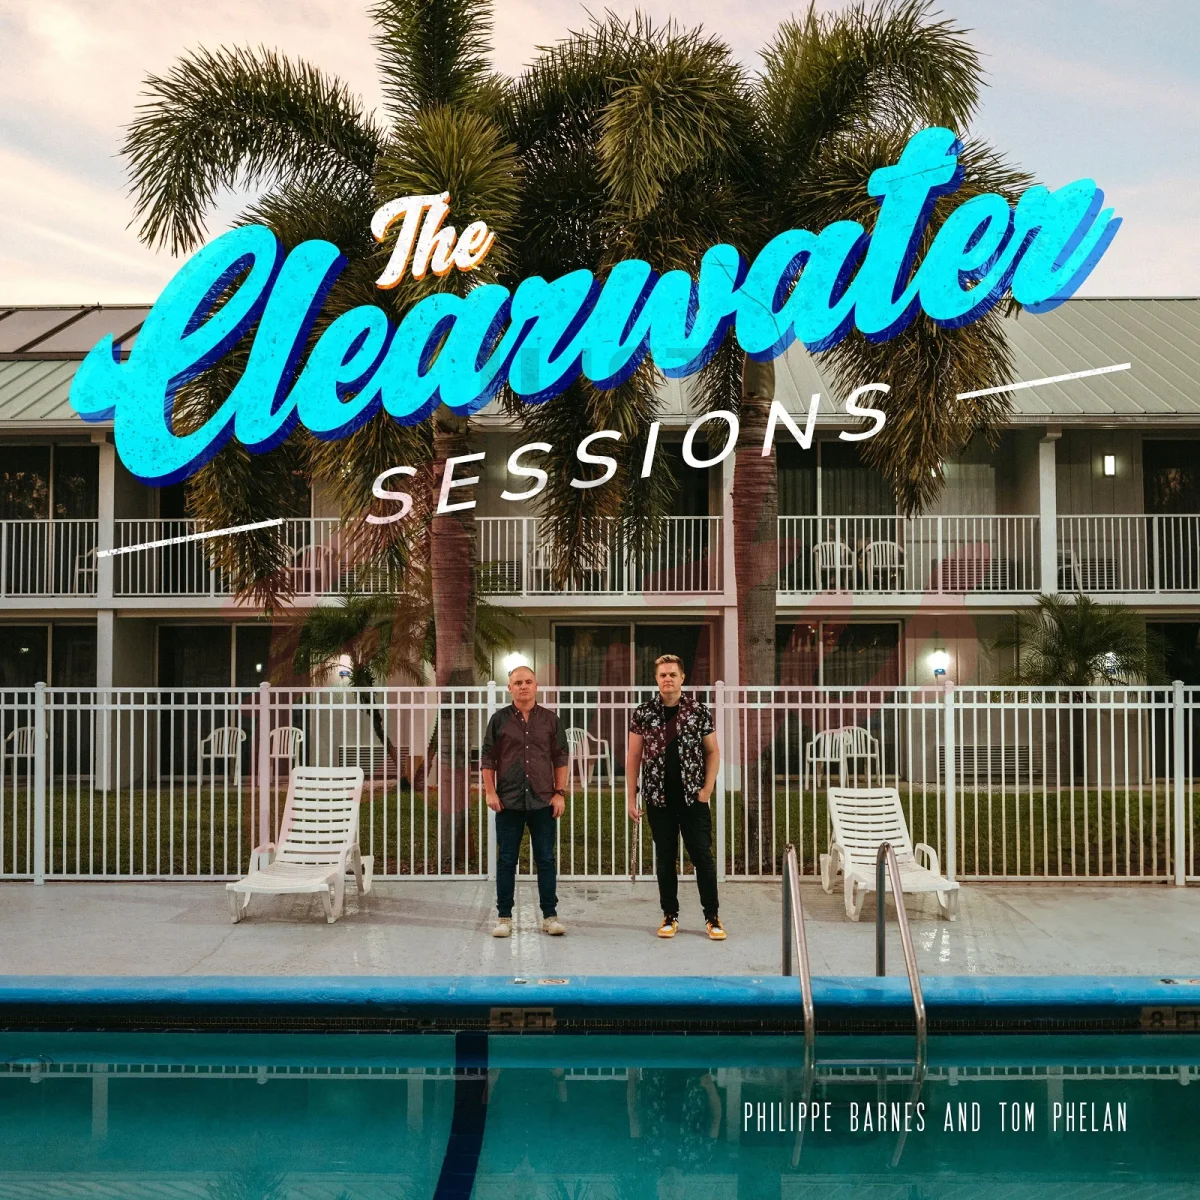 Philippe Barnes and Tom Phelan: The Clearwater Sessions [Vinyl]